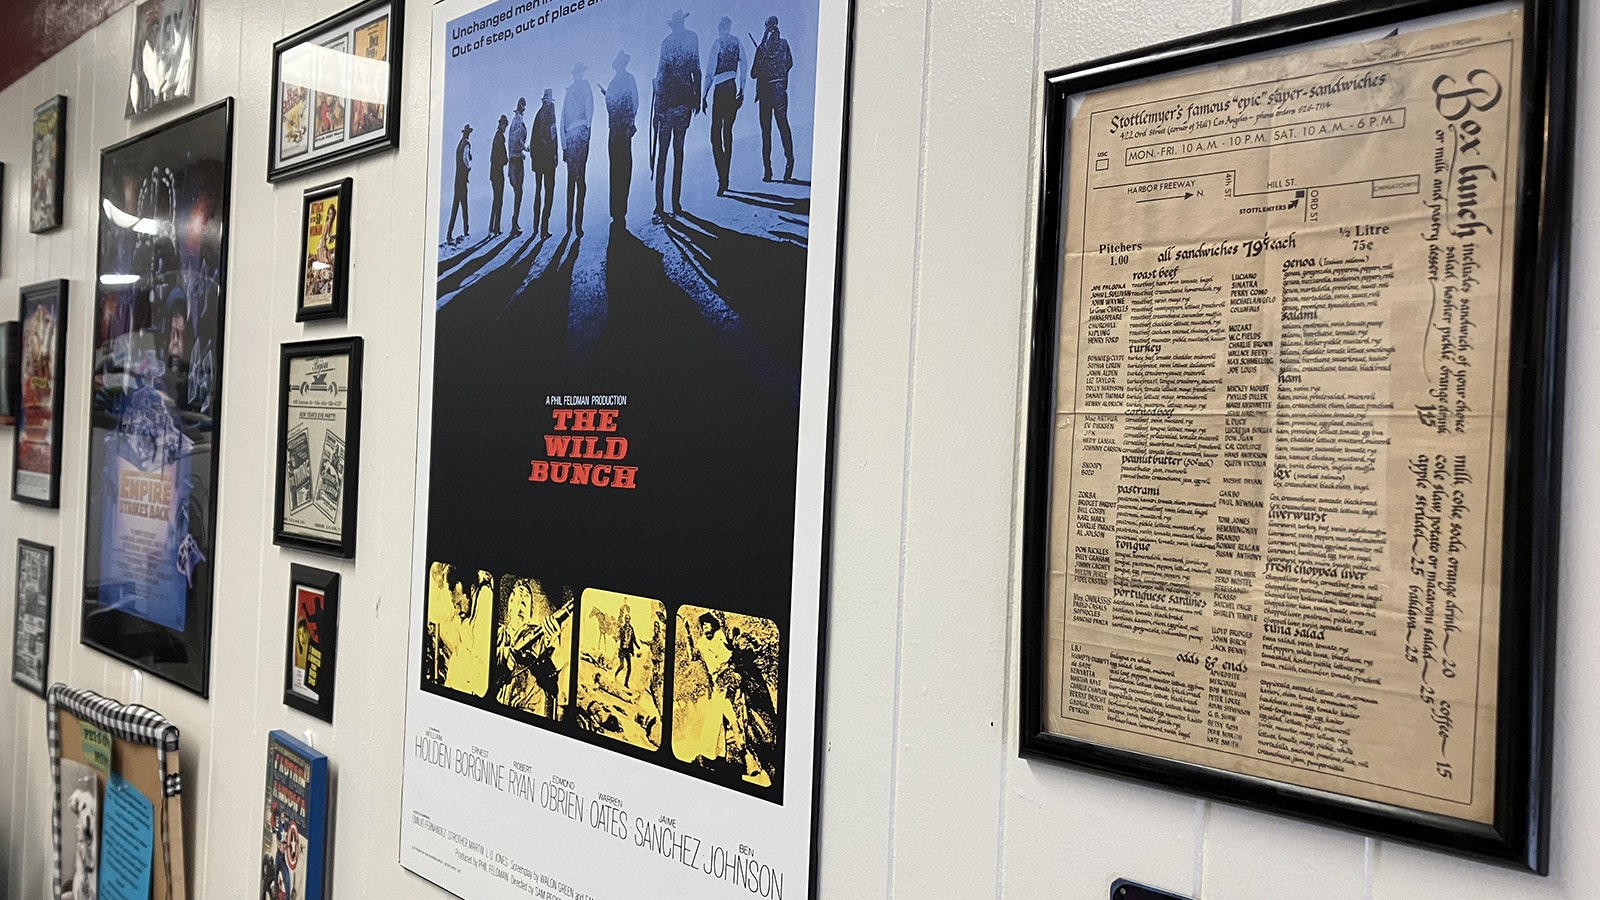 Movie posters decorate the walls of The Wild Lunch Market and there is also a menu from a Hollywood deli on the wall.